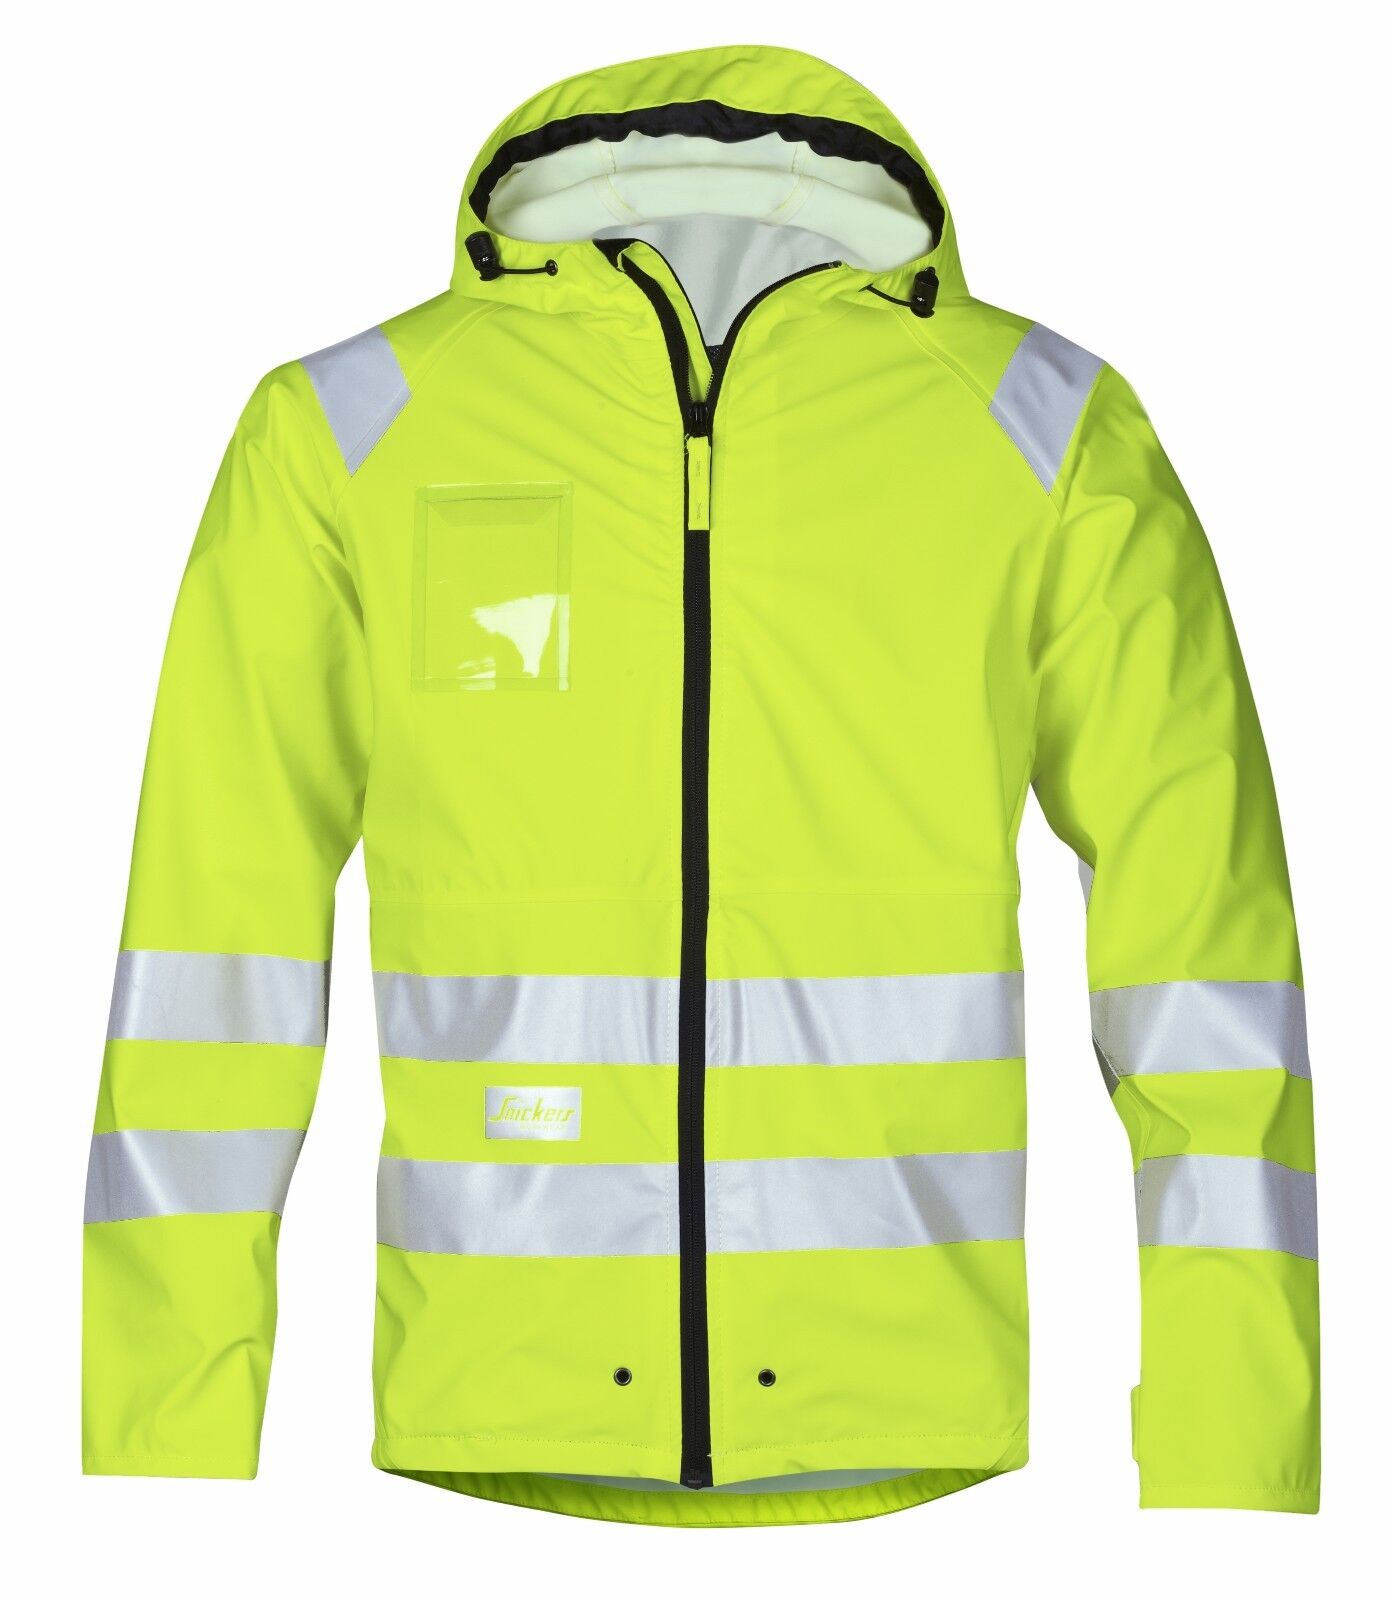 Snickers Workwear 8233 High-Vis PU Class Rain SnickersD All stores are sold Jacket free shipping 3